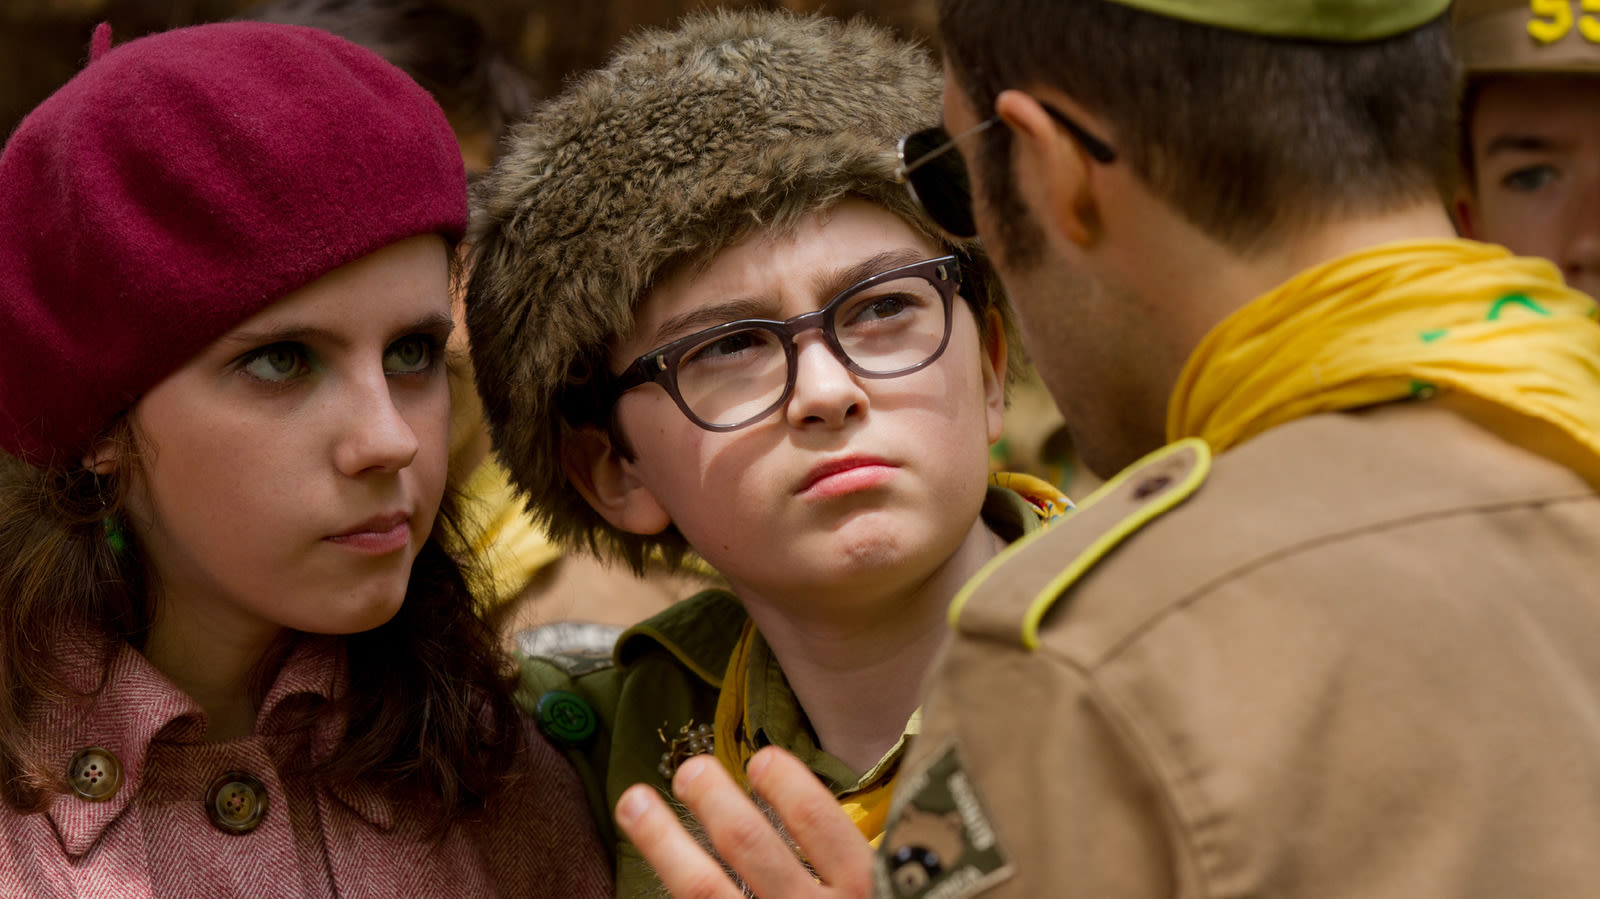 A Heavy Detail In Moonrise Kingdom Came From Director Wes Anderson's Real Life - SlashFilm